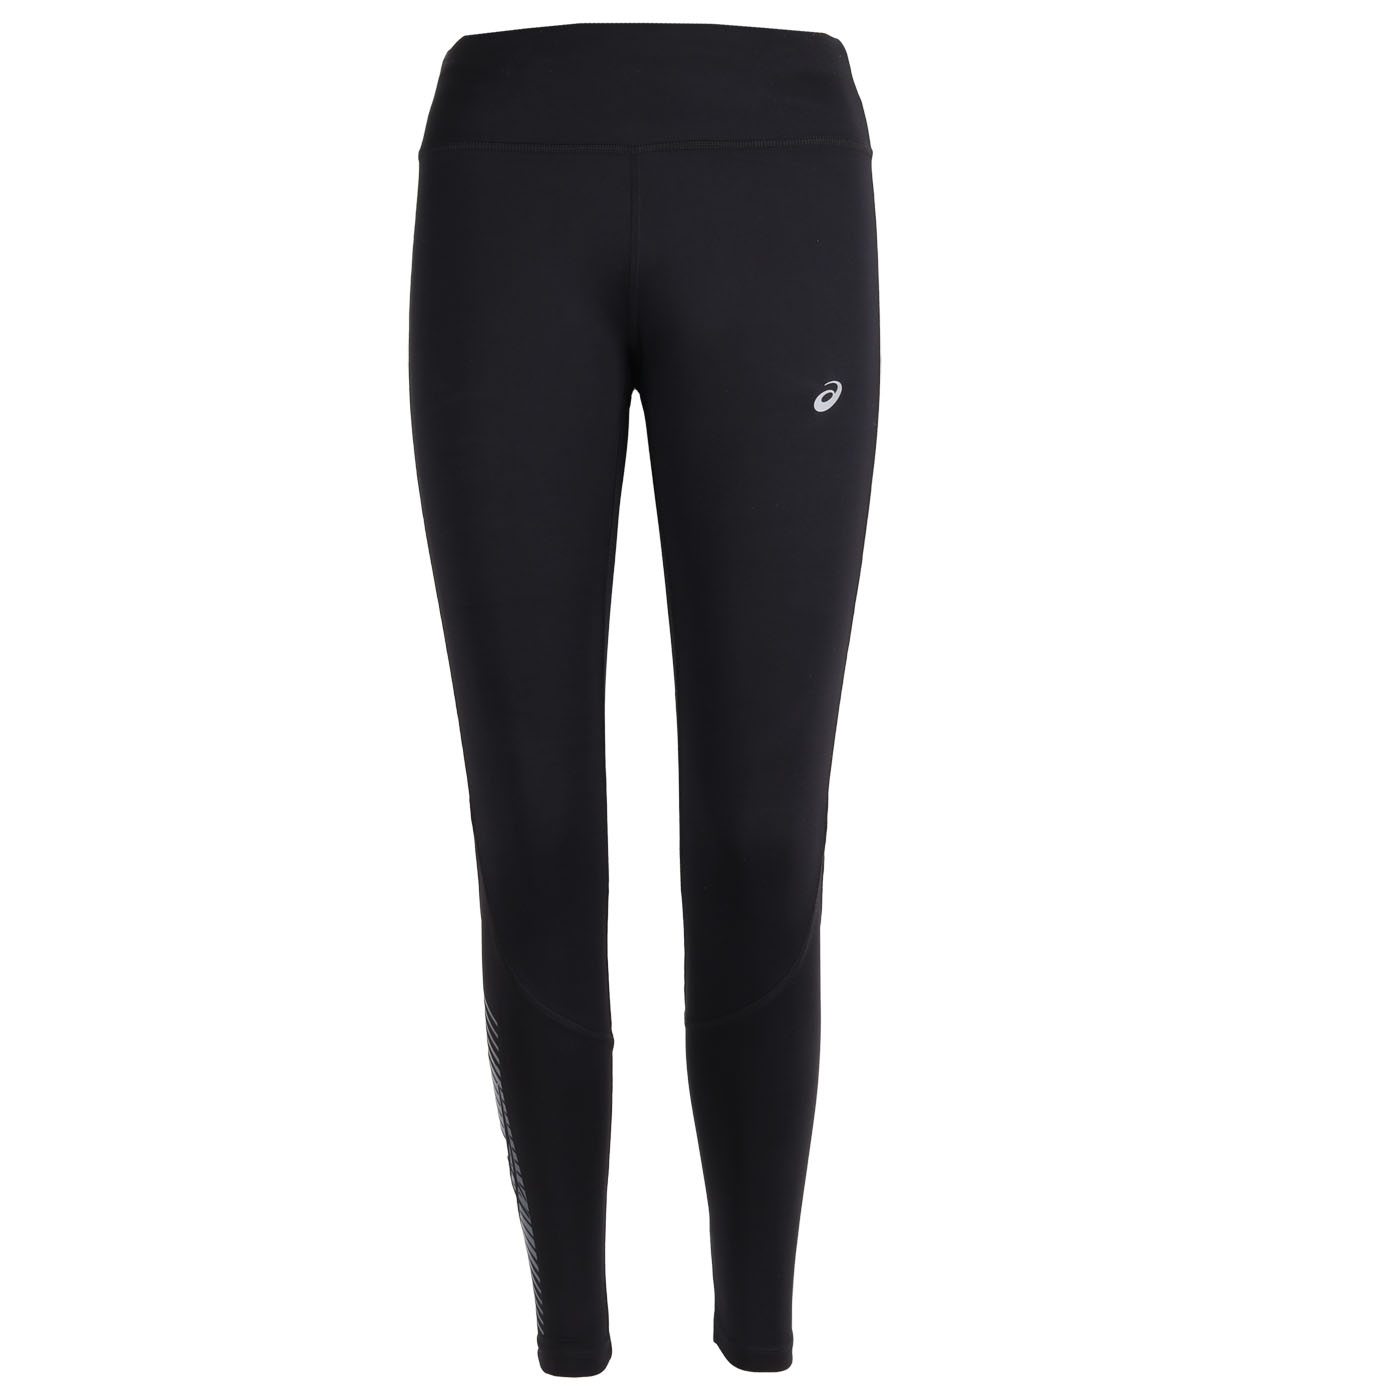 Image of asics Icon Tights Women - performance black/carrier grey